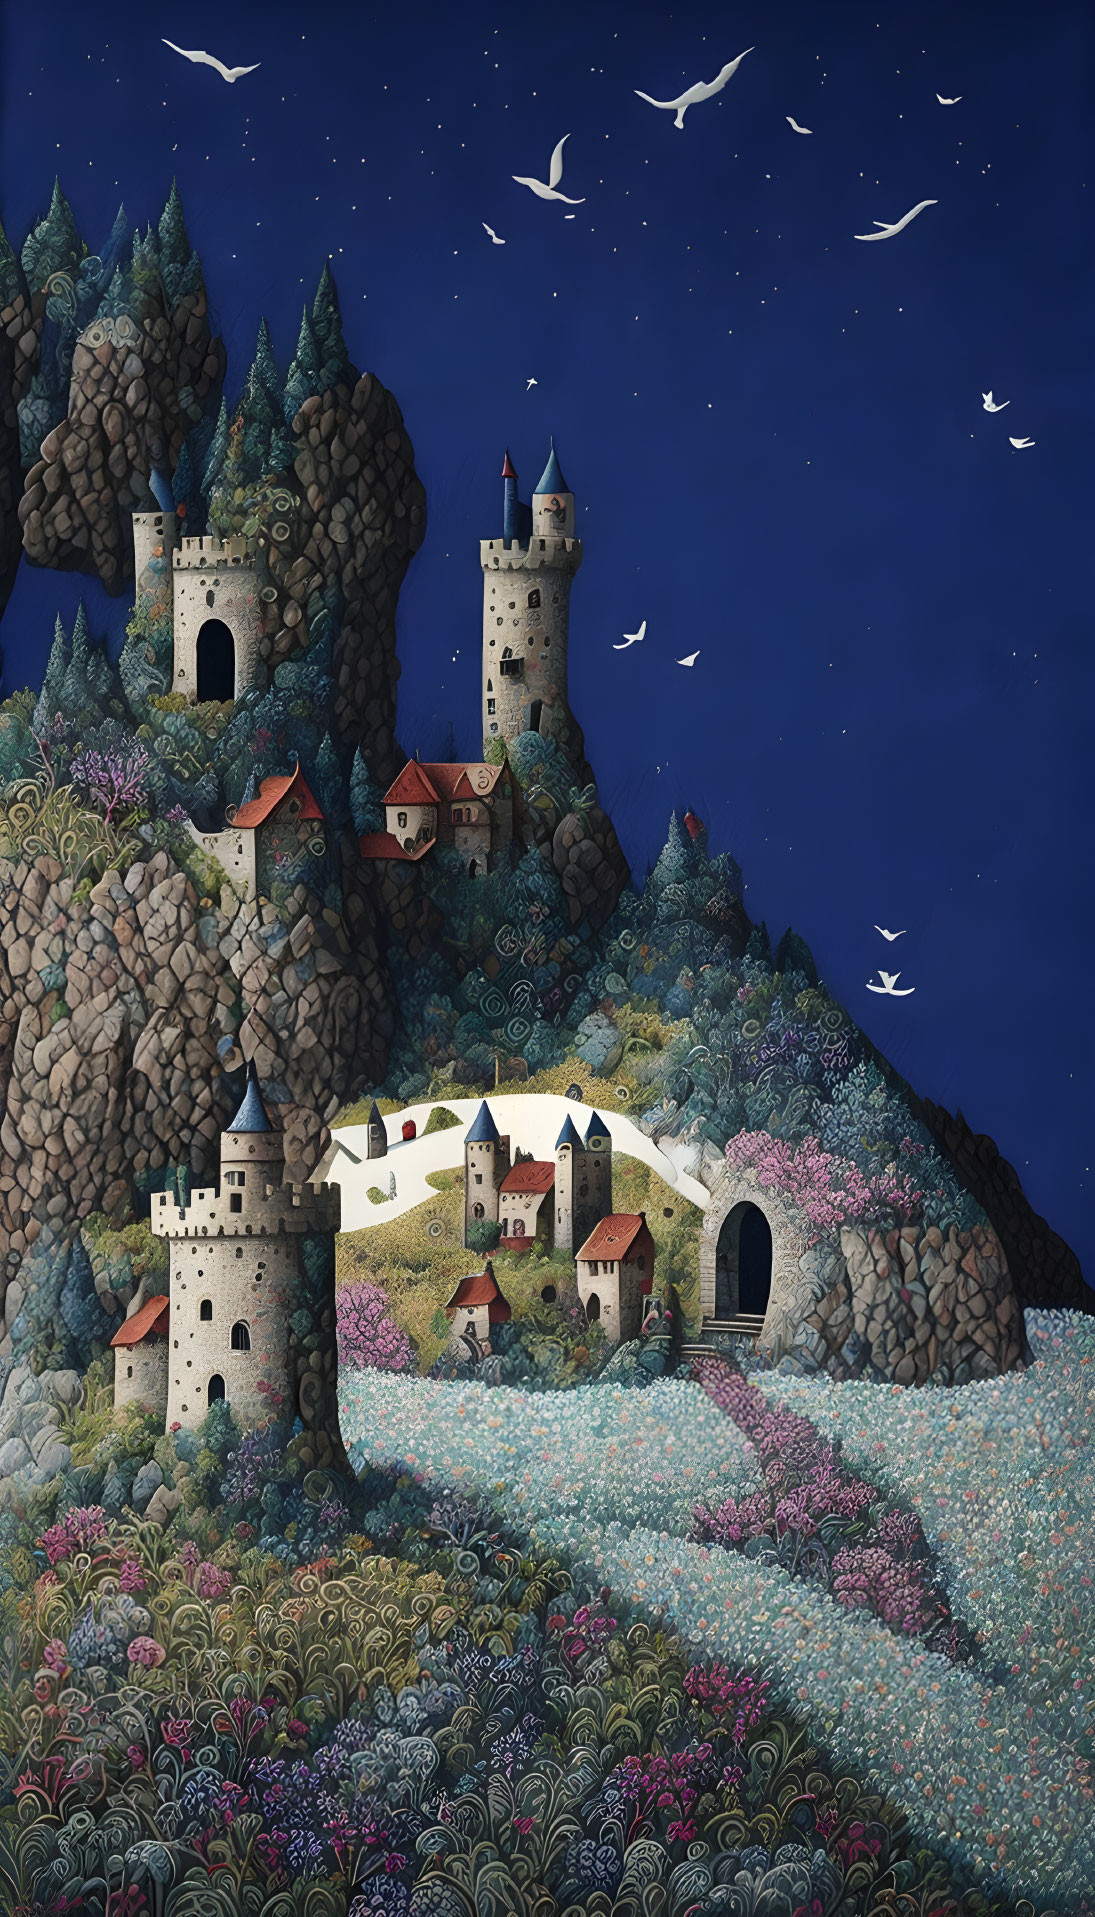 Whimsical nighttime landscape with flower-covered hill and castles